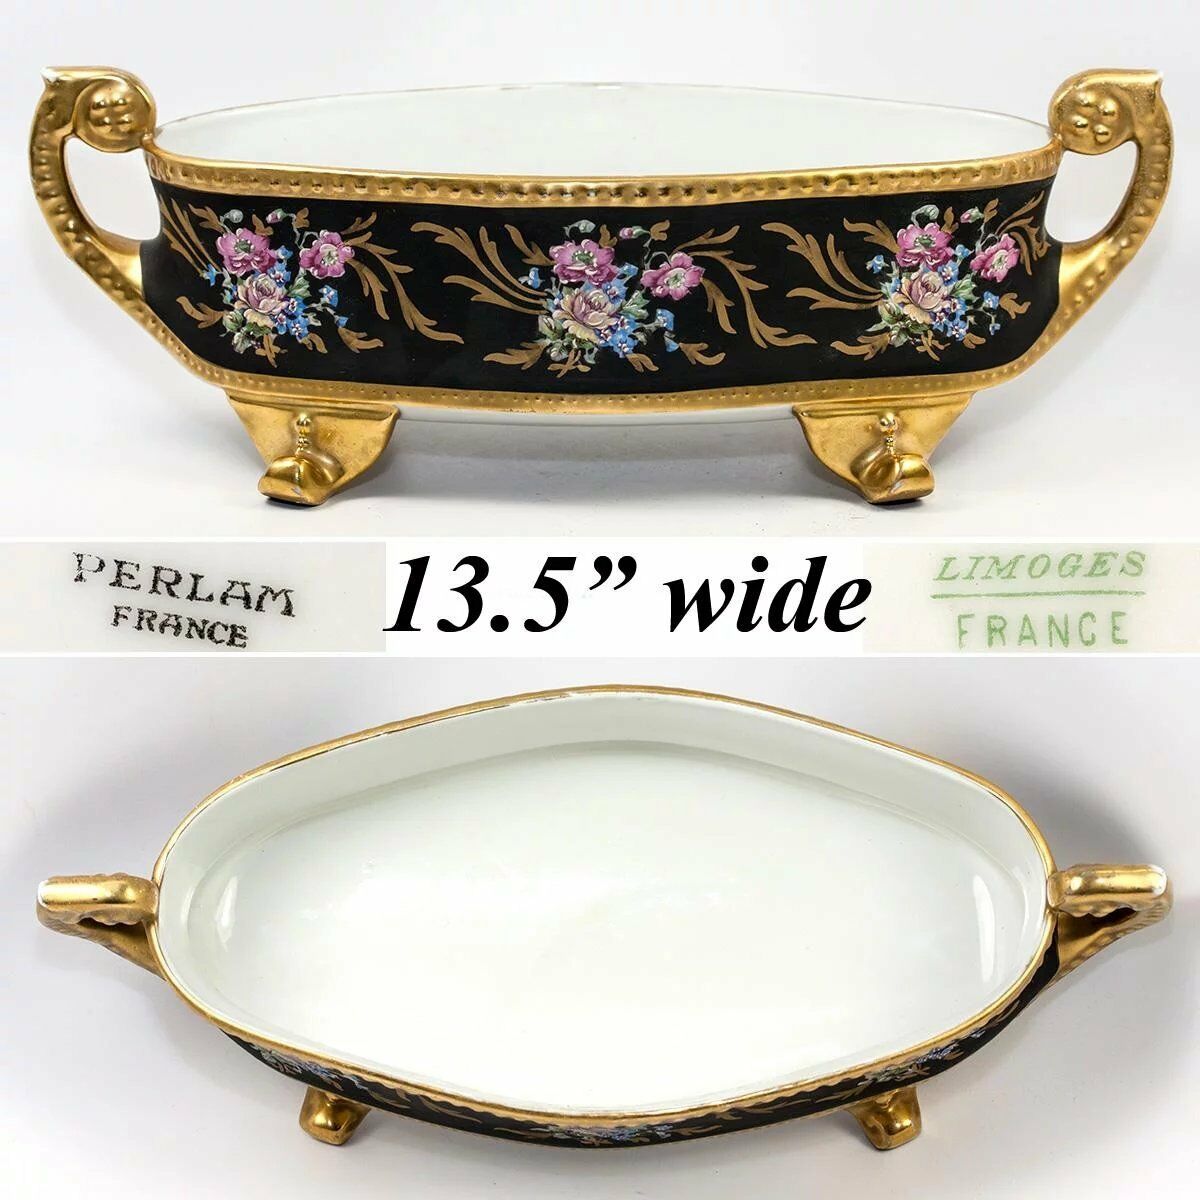 LG 13.5" Antique Hand Painted Limoges, France, French Centerpiece, Gold Enamel